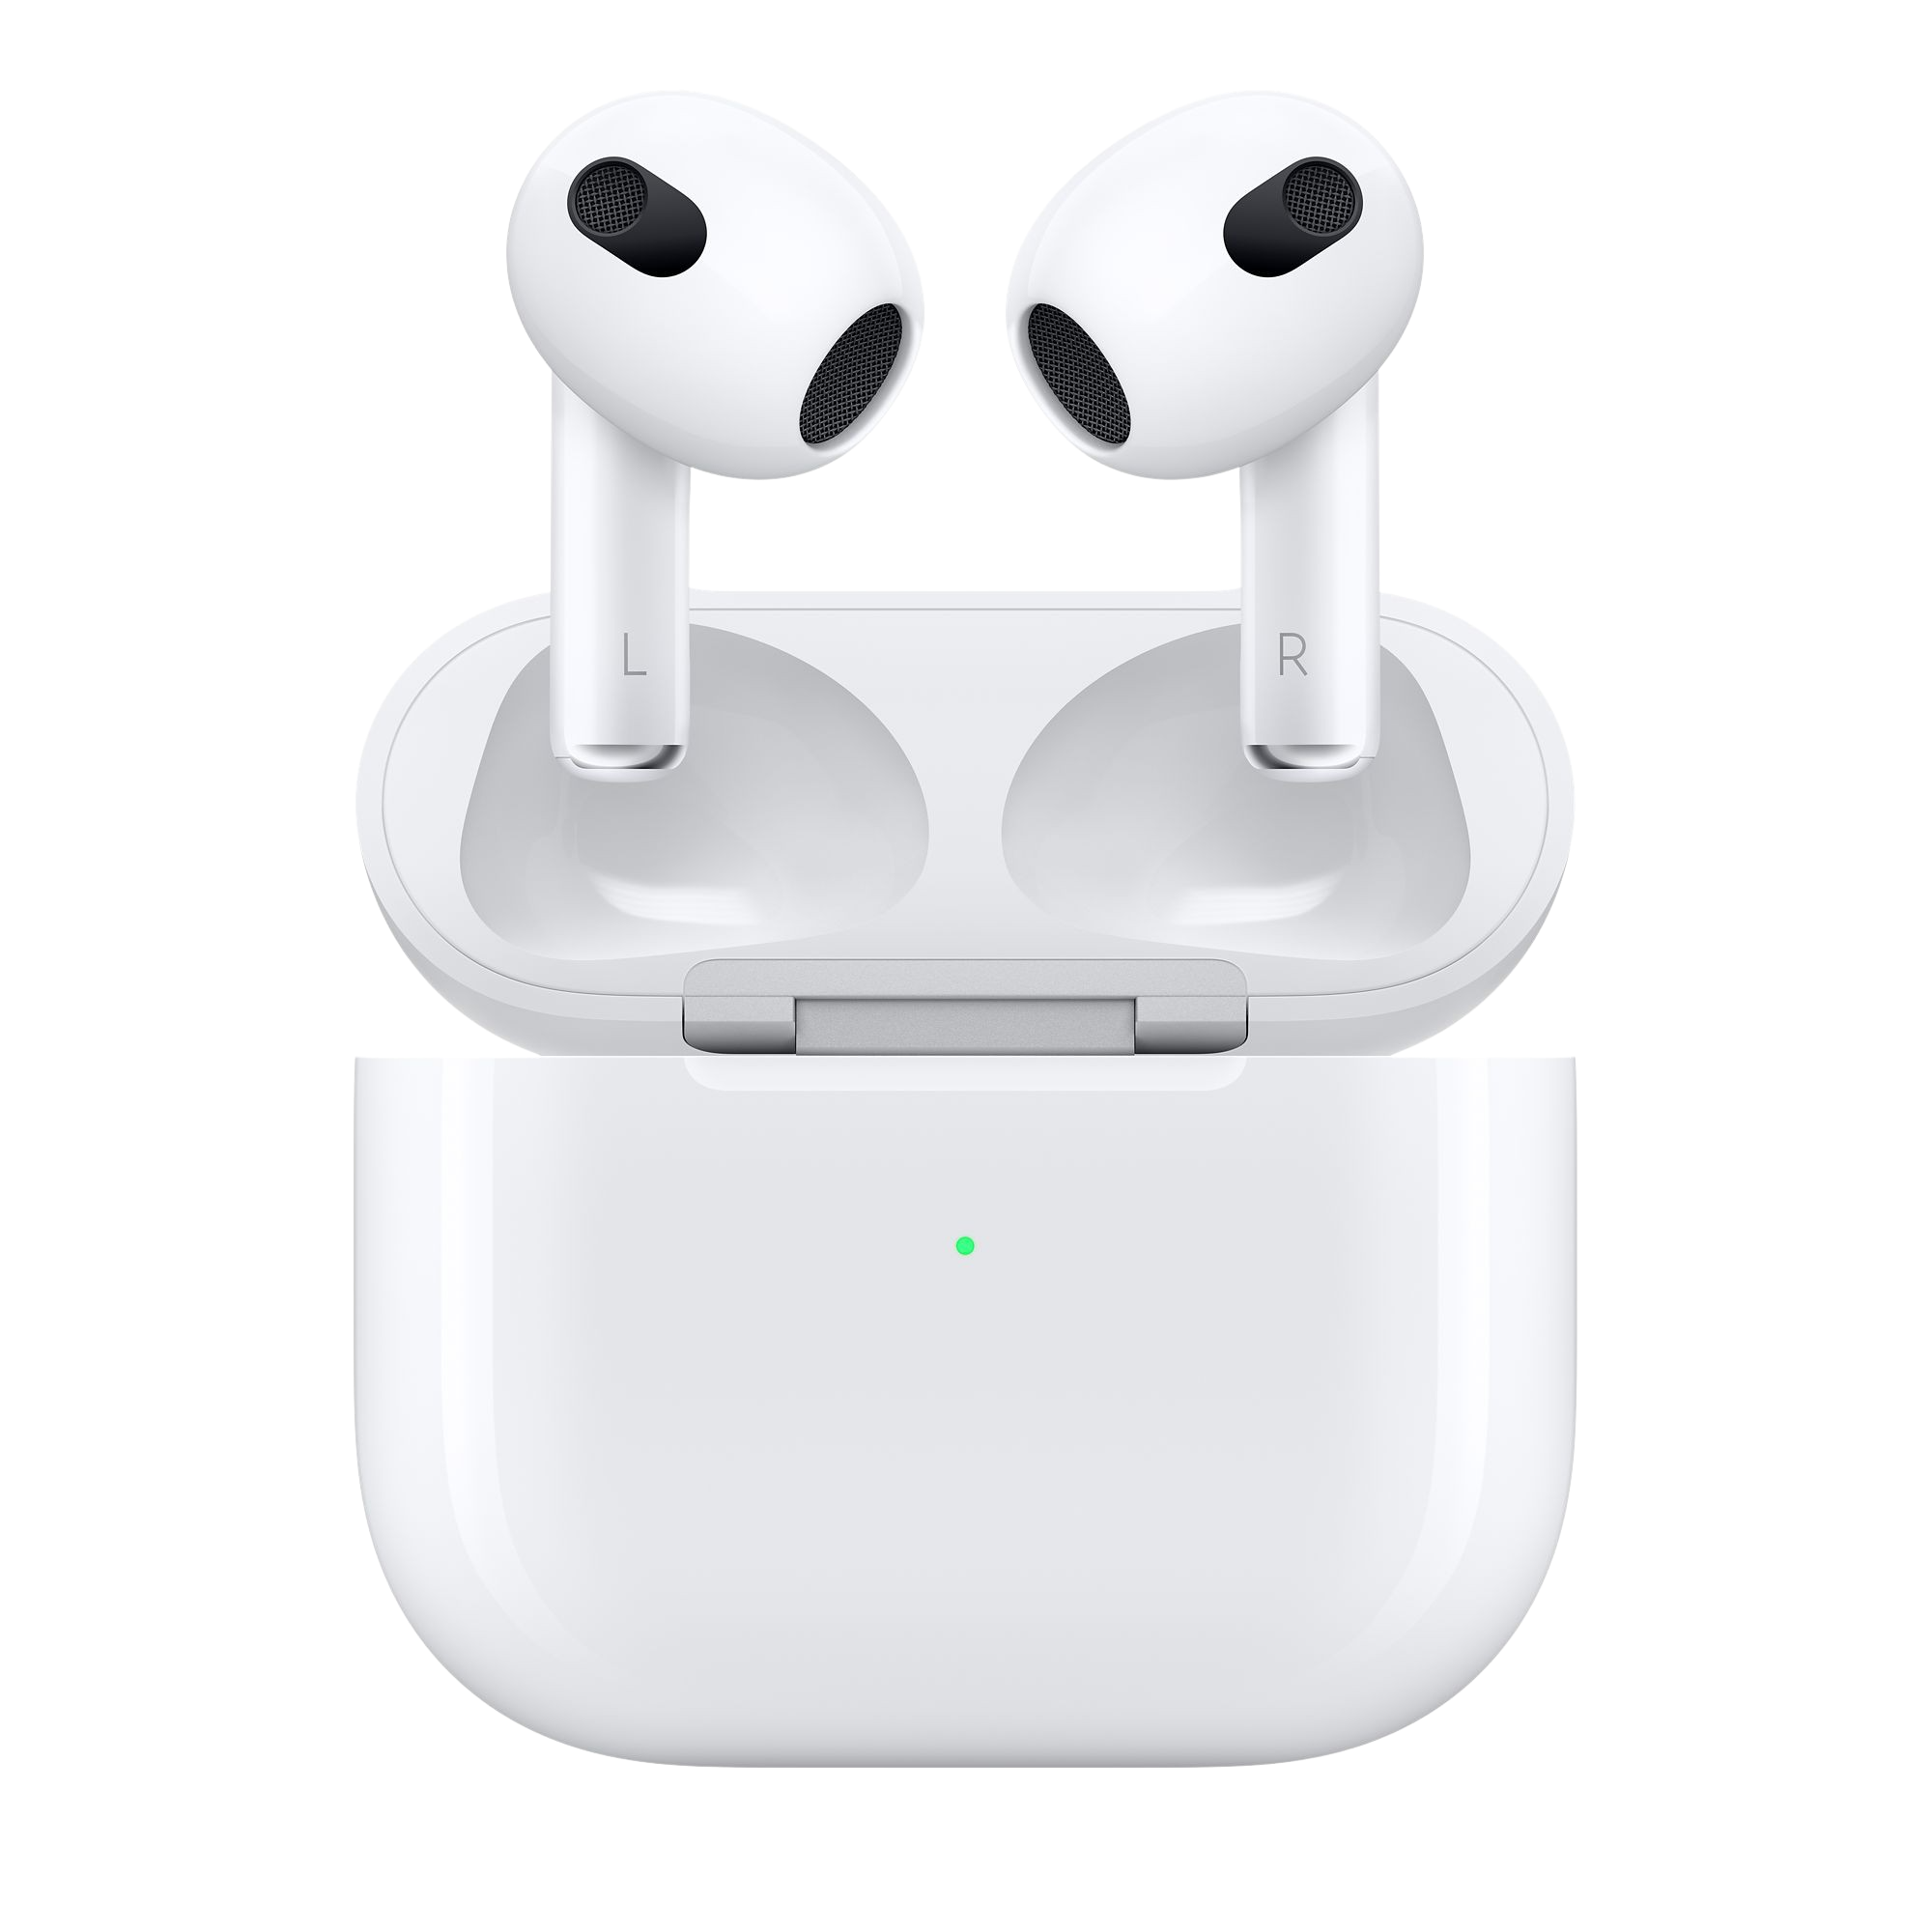 Rent Apple AirPods In-ear Bluetooth Headphones from €9.90 per month